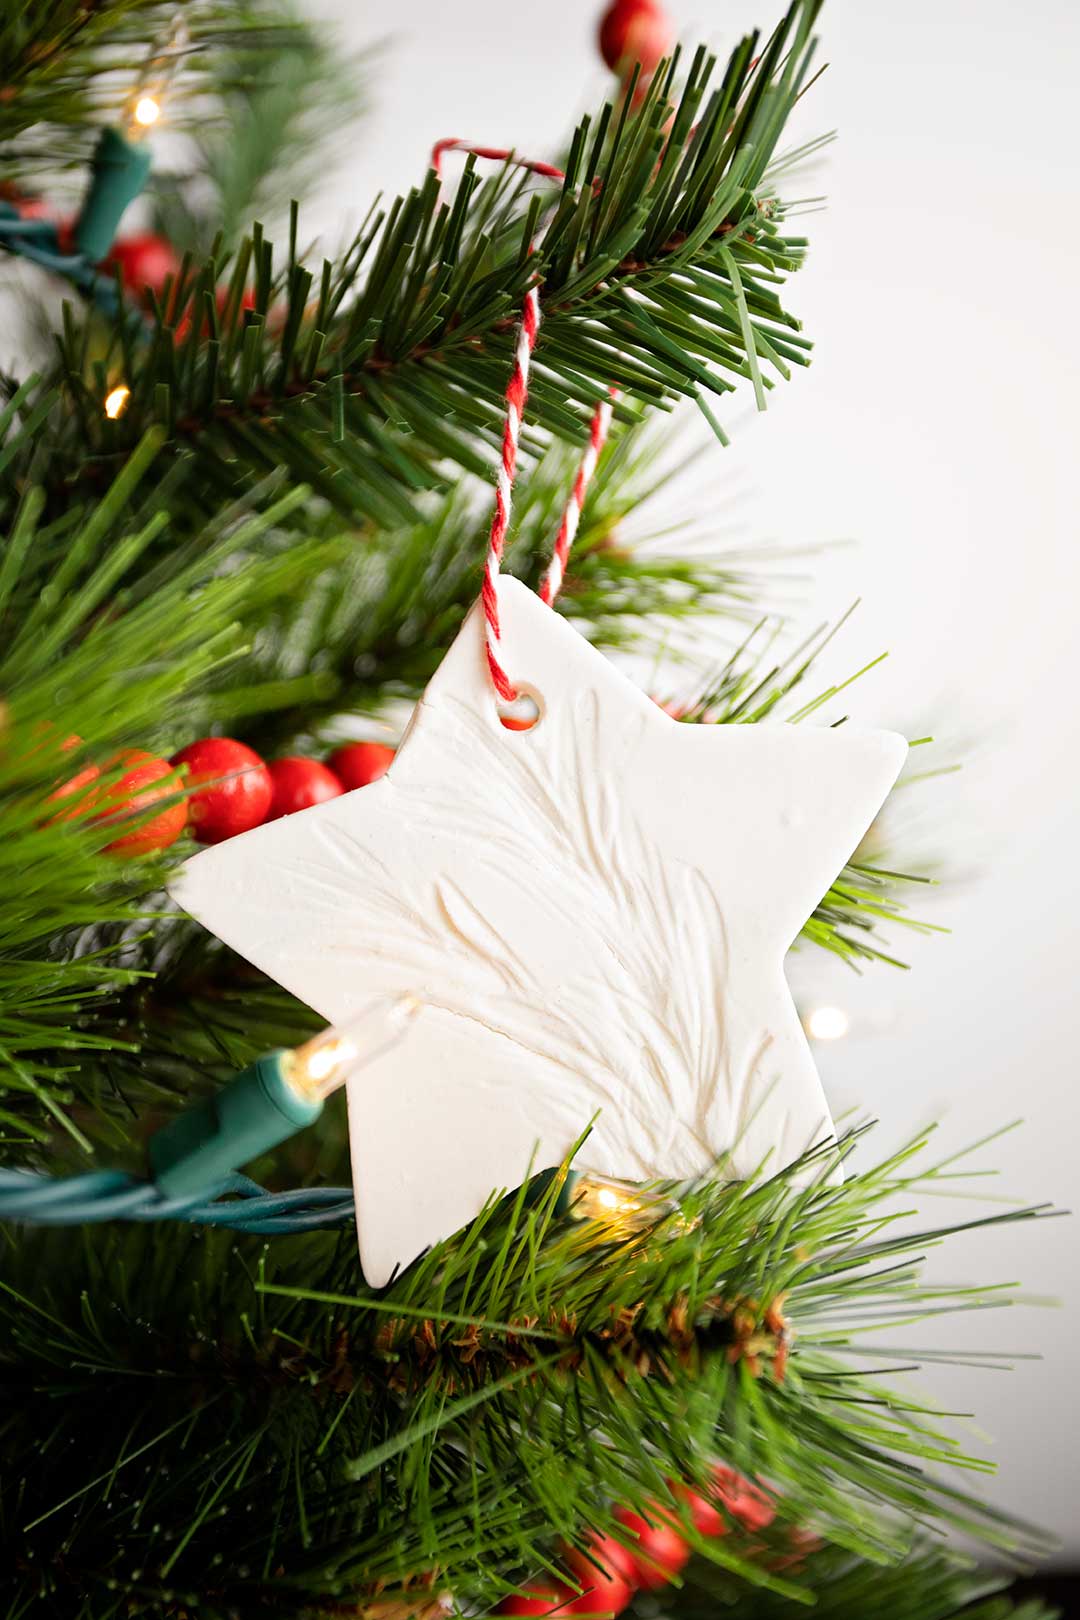 Star shaped cornstarch ornament with greenery print hanging on a Christmas tree.